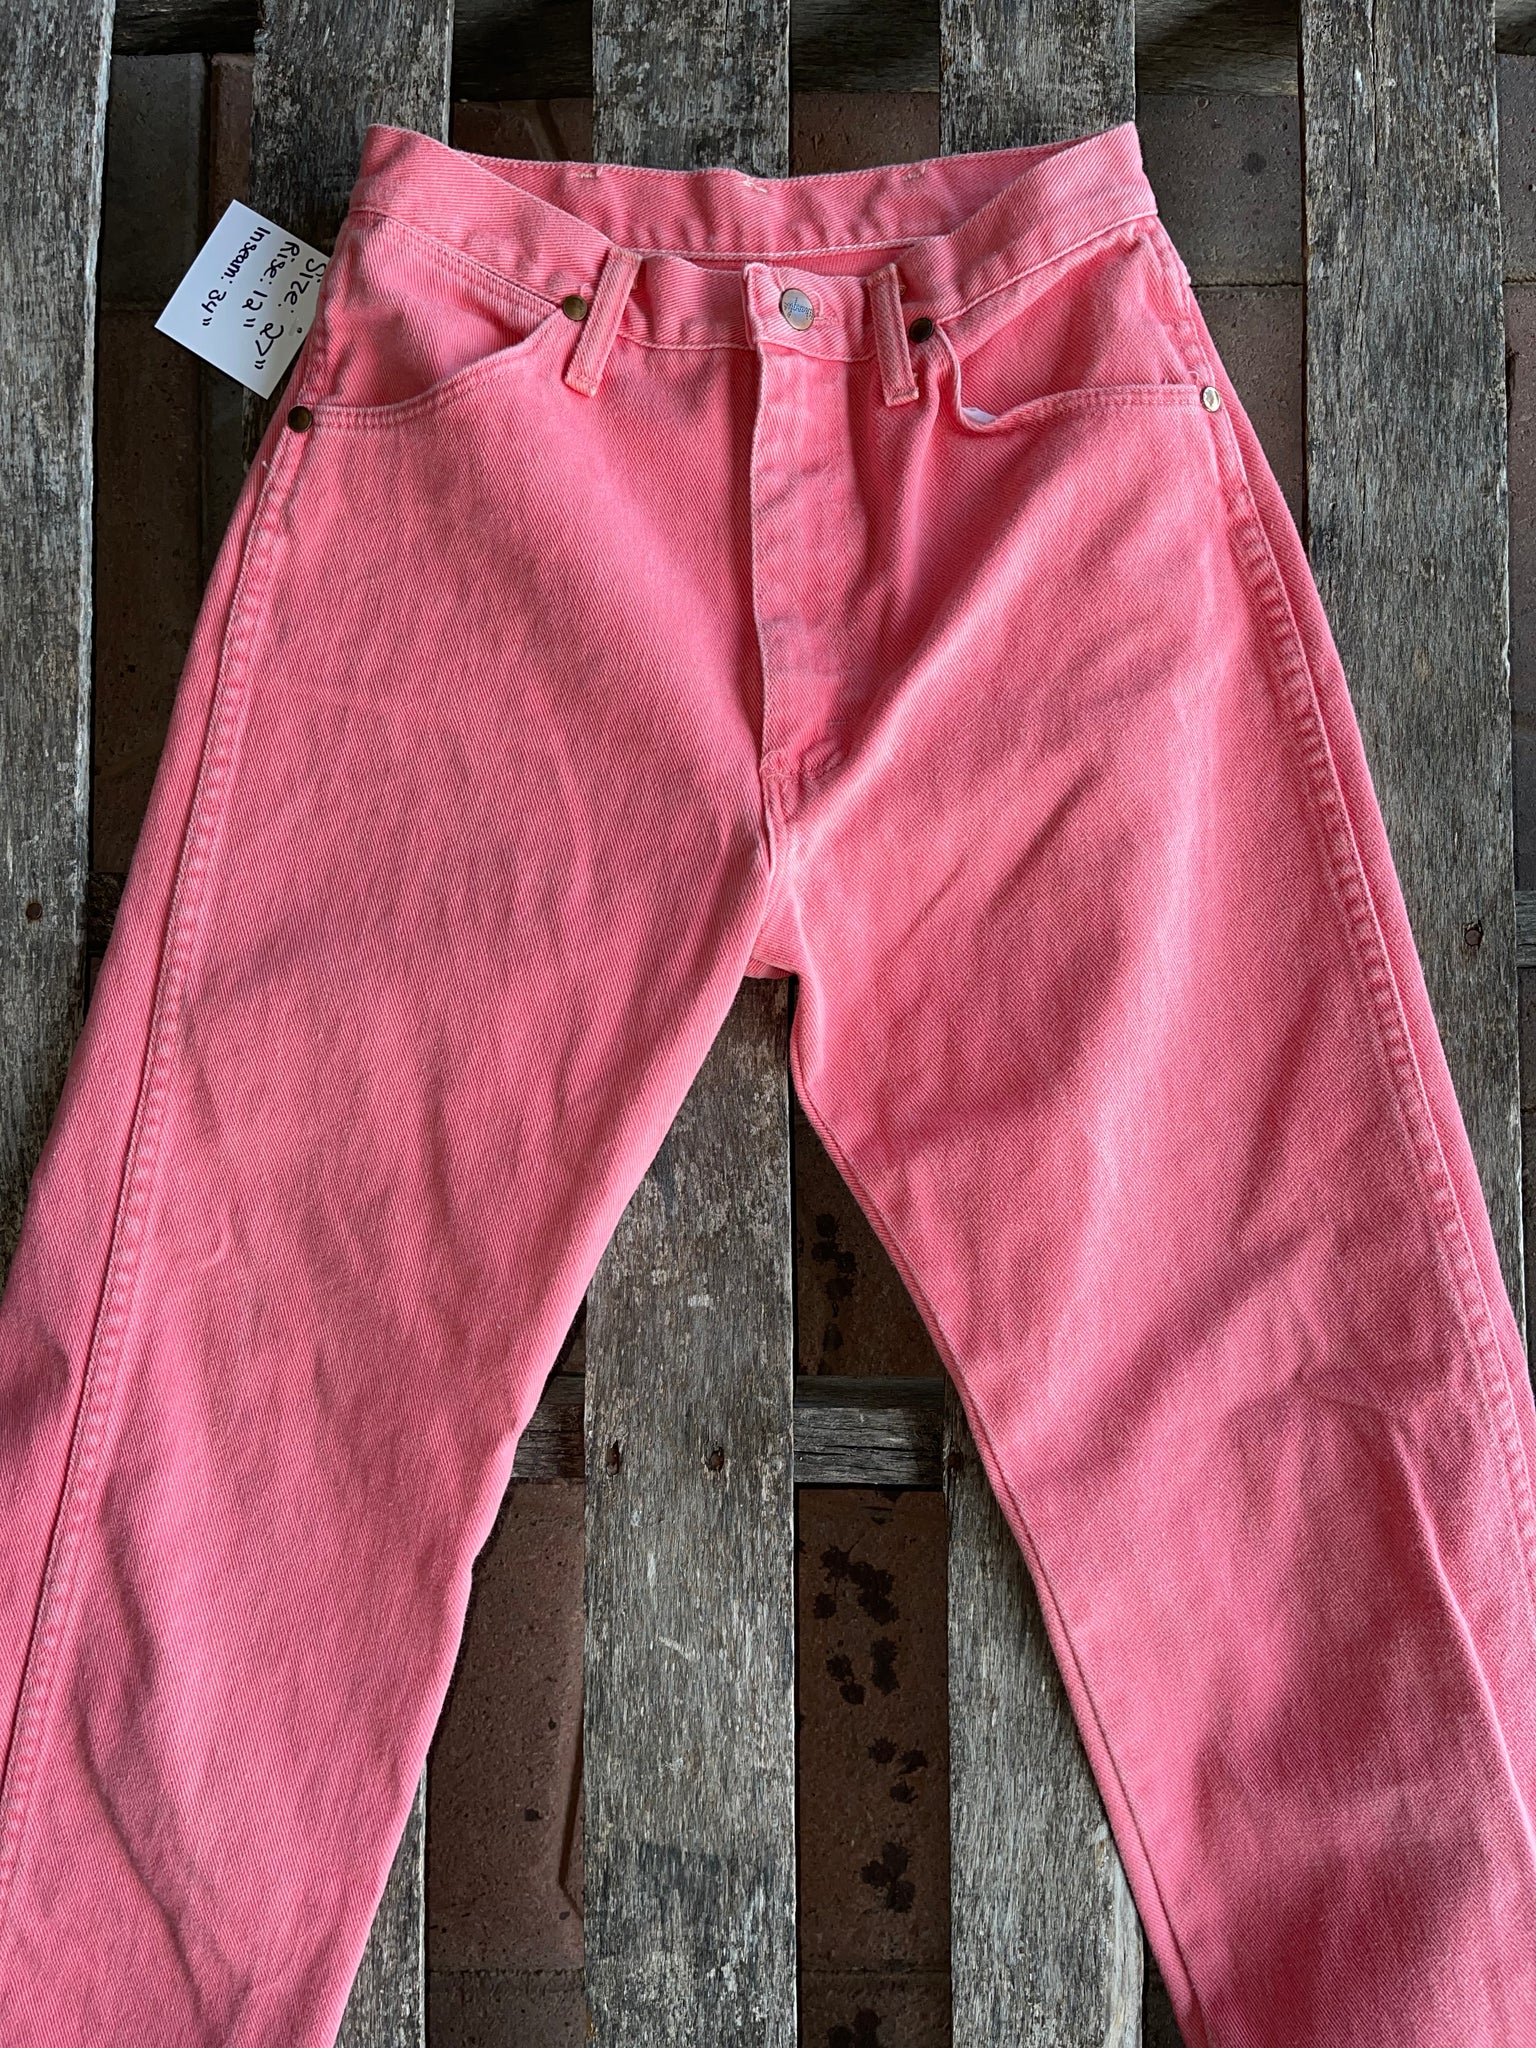 The Barbie Pink Wranglers